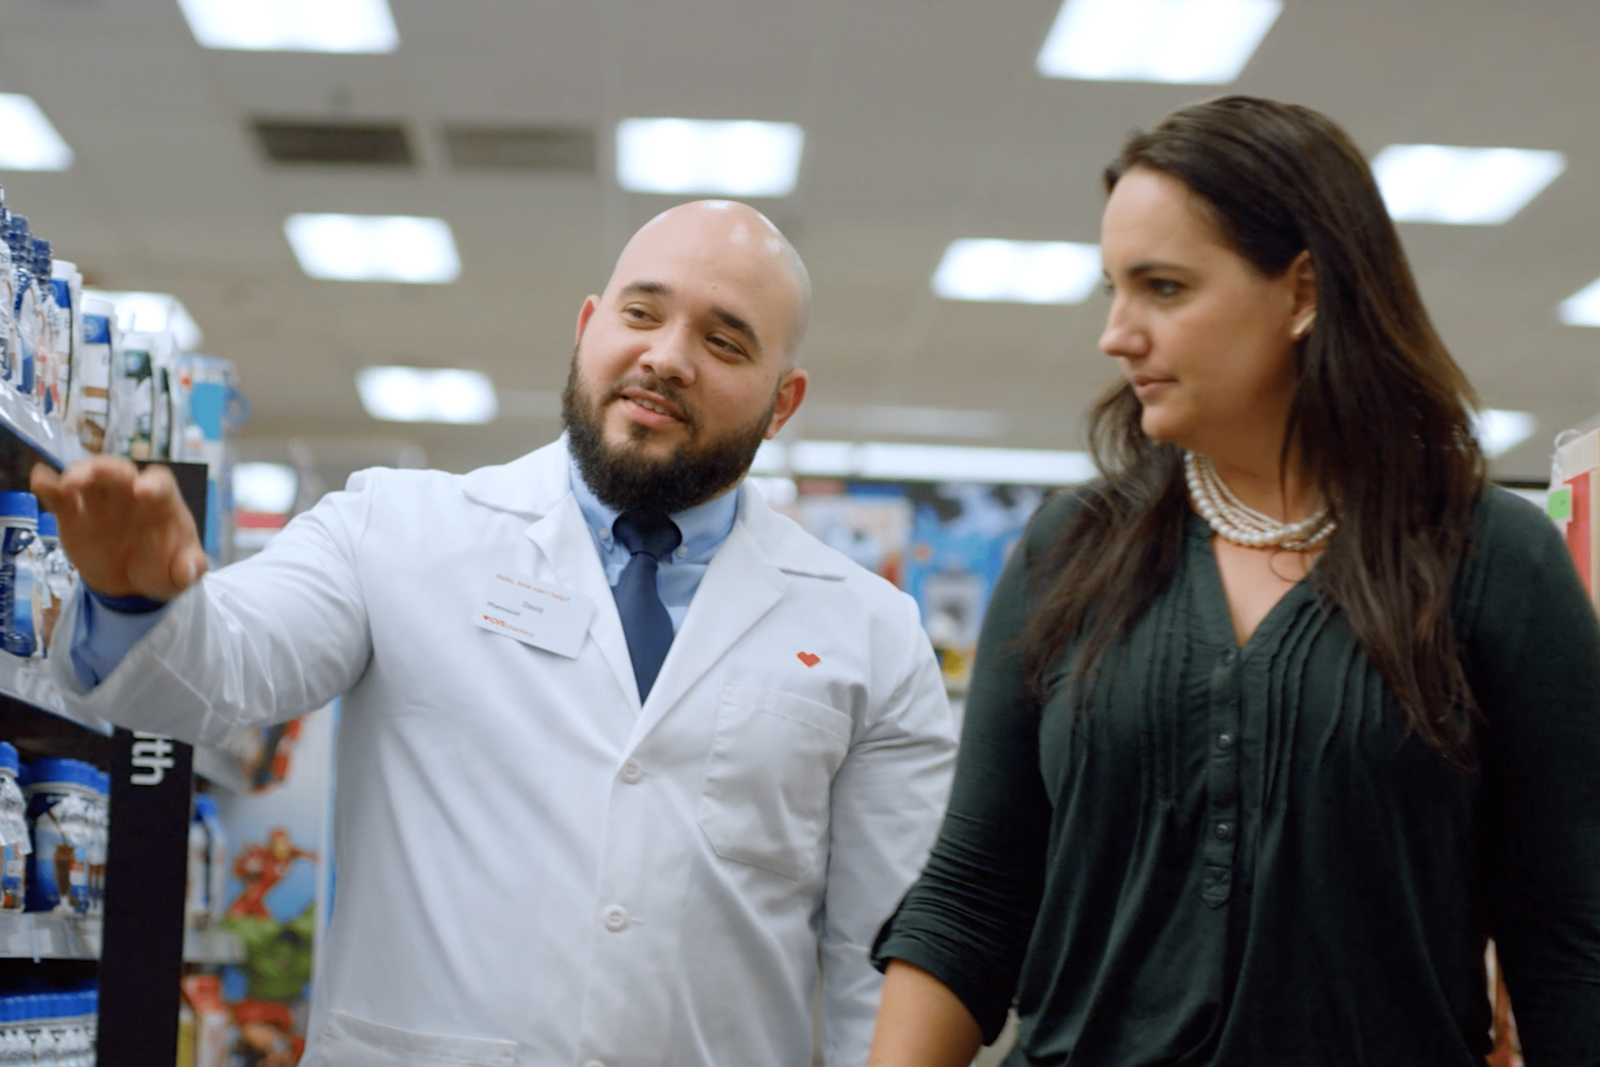 A pharmacist shows a guest items in the aisle of a CVS Pharmacy location.